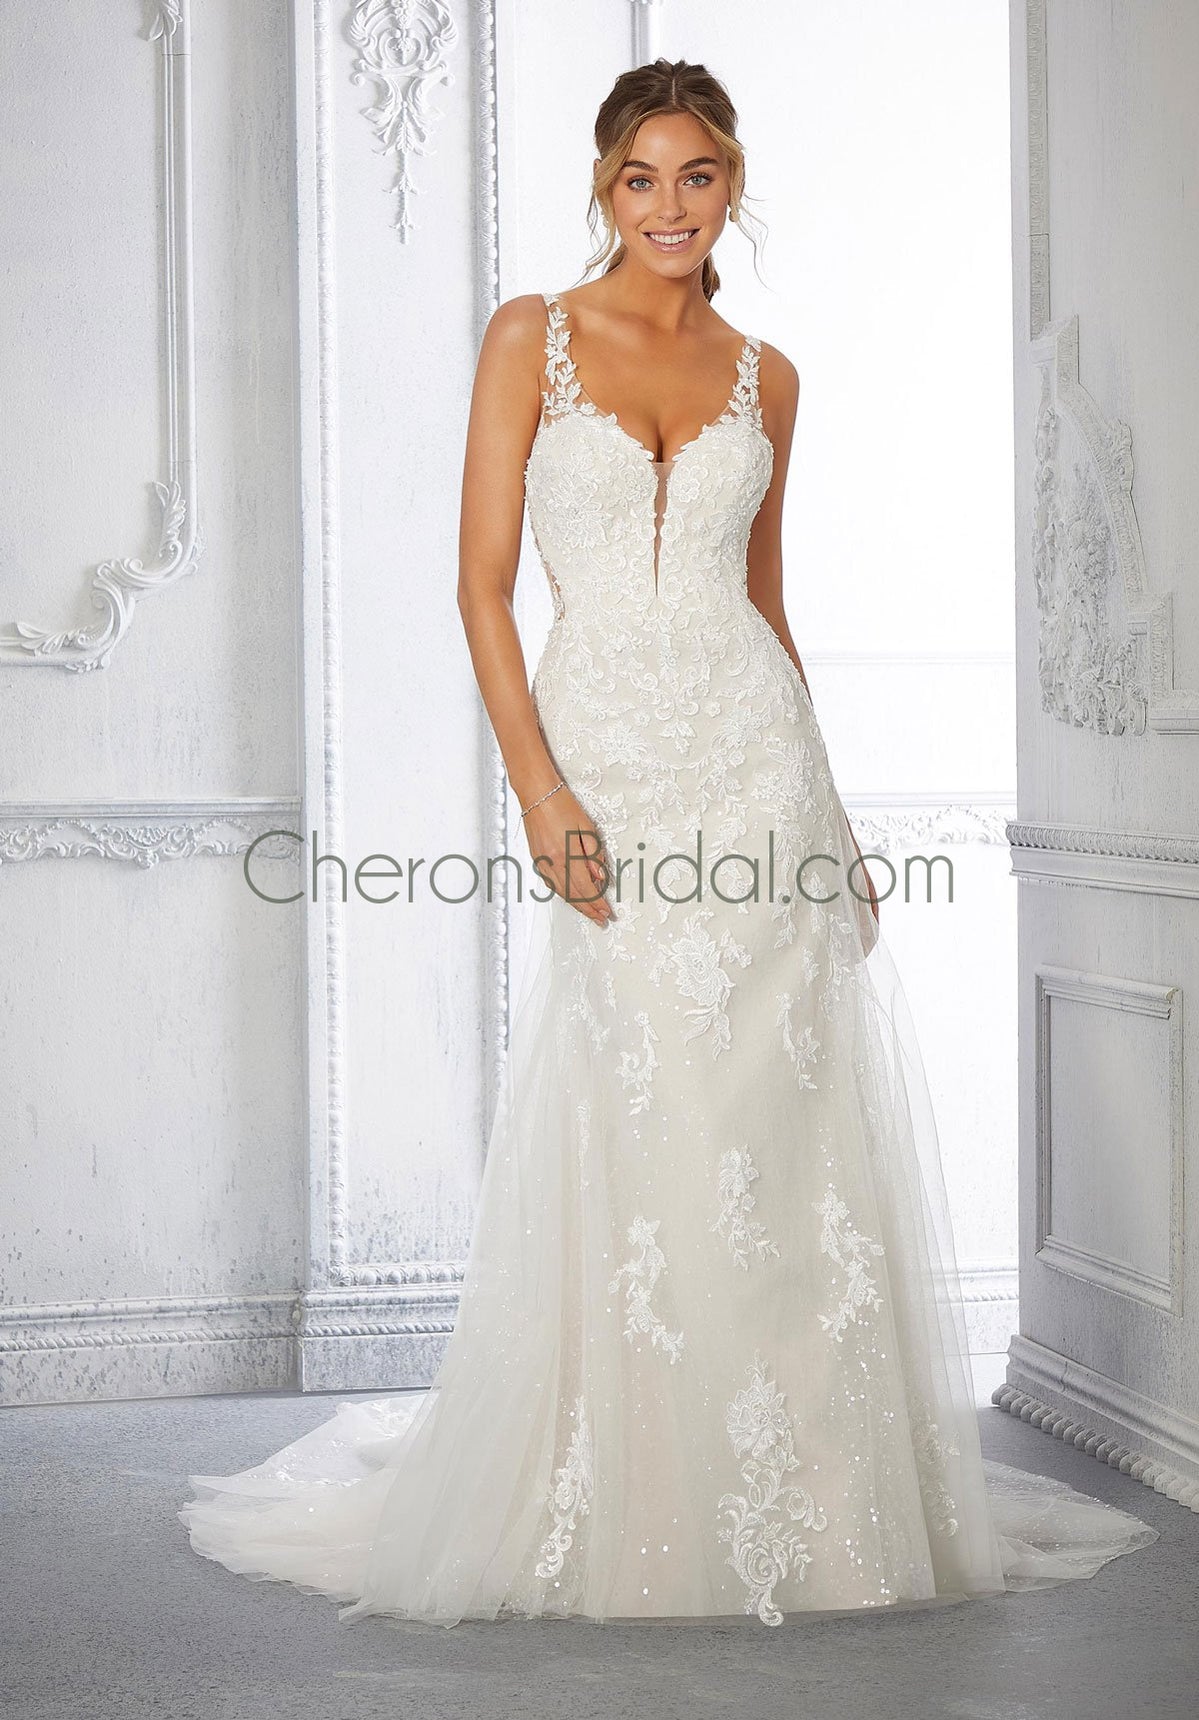 Morilee - 2364 - Clarissa - Cheron's Bridal, Wedding Gown - Morilee Line - - Wedding Gowns Dresses Chattanooga Hixson Shops Boutiques Tennessee TN Georgia GA MSRP Lowest Prices Sale Discount